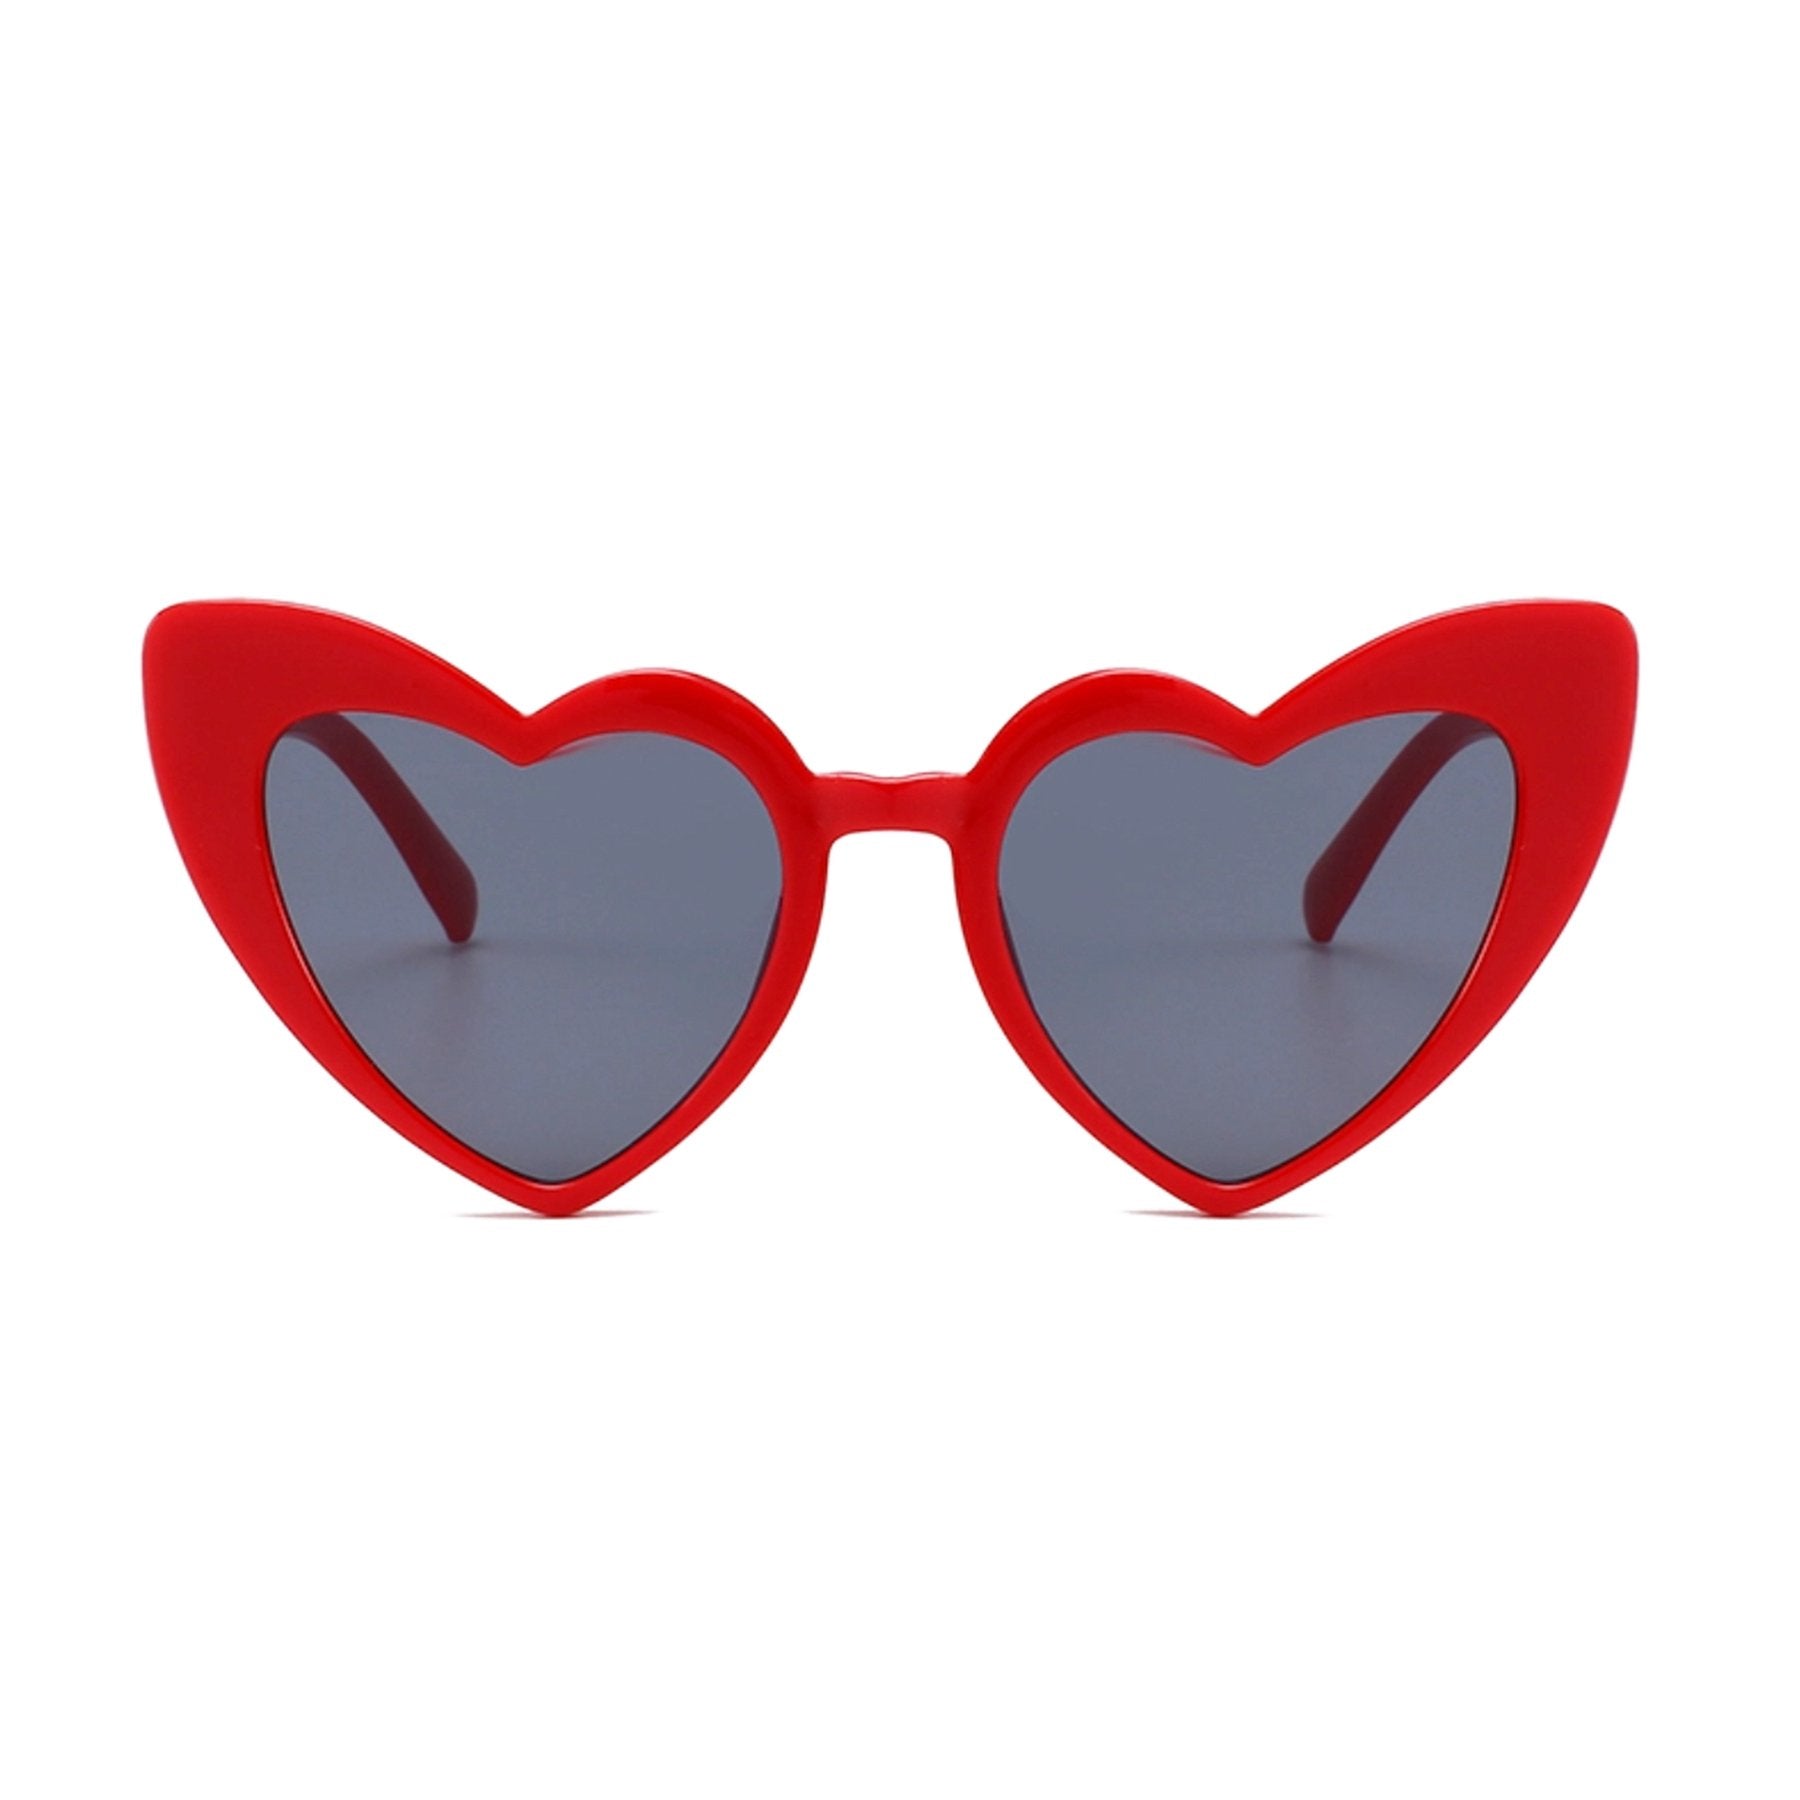 Heart sunglasses in red by Birdy Grey, front view